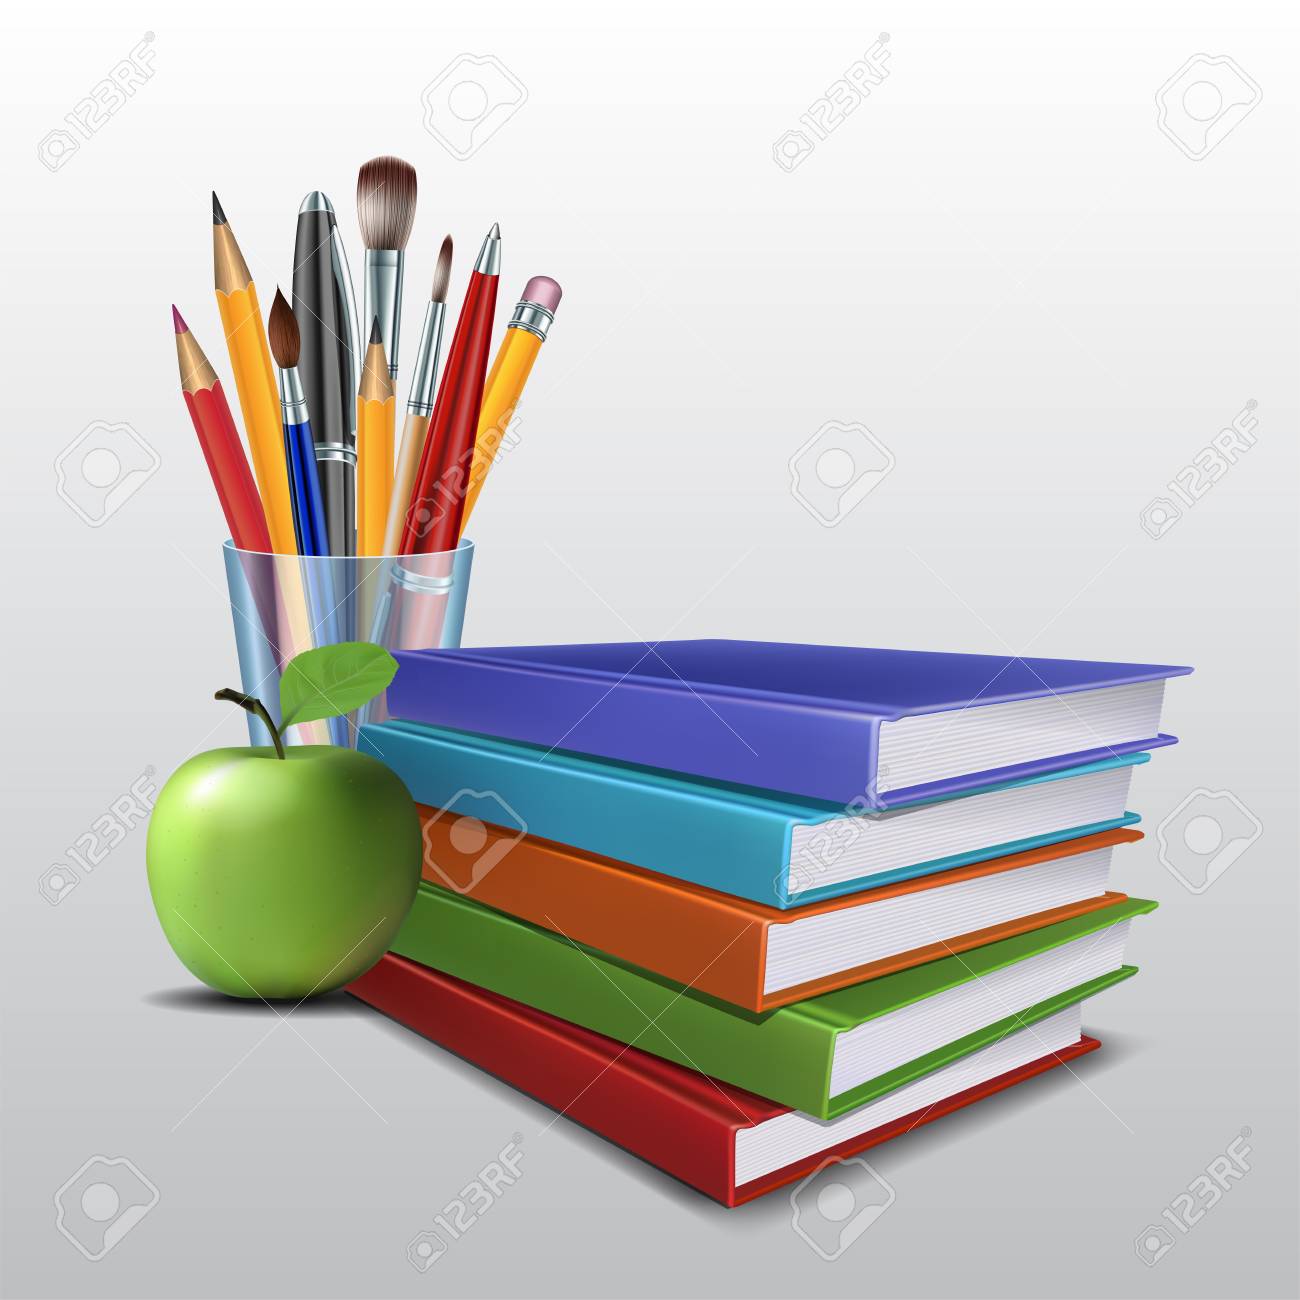 Stack of books by pencil and apple